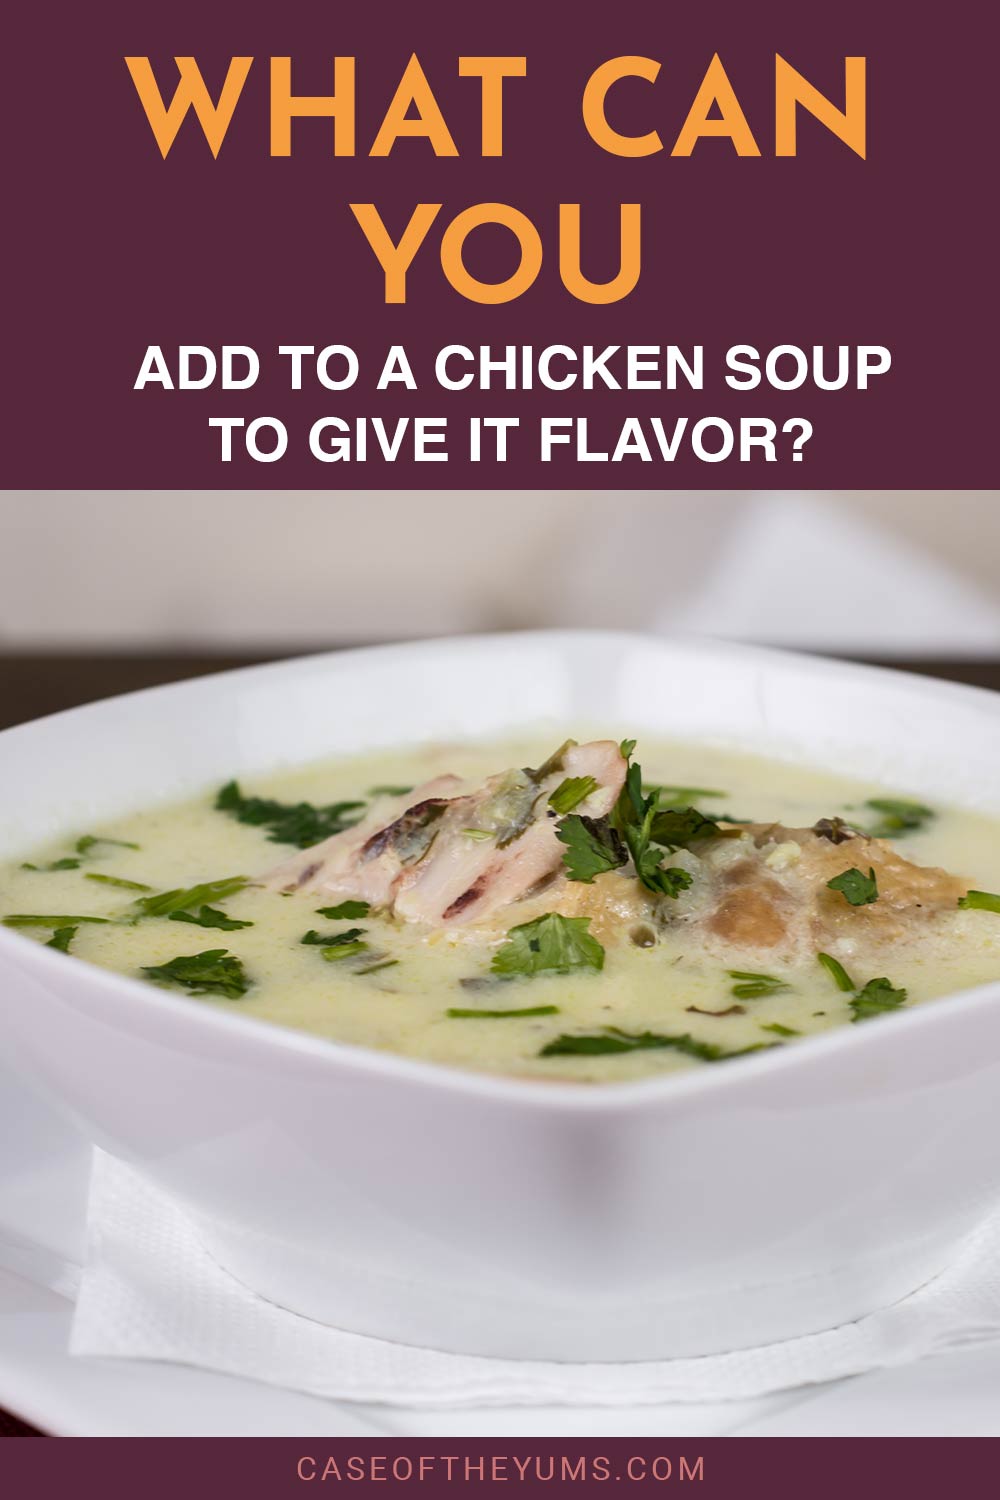 Chicken soup in a white bowl on a wooden table - What Can You Add To Give It Flavor?